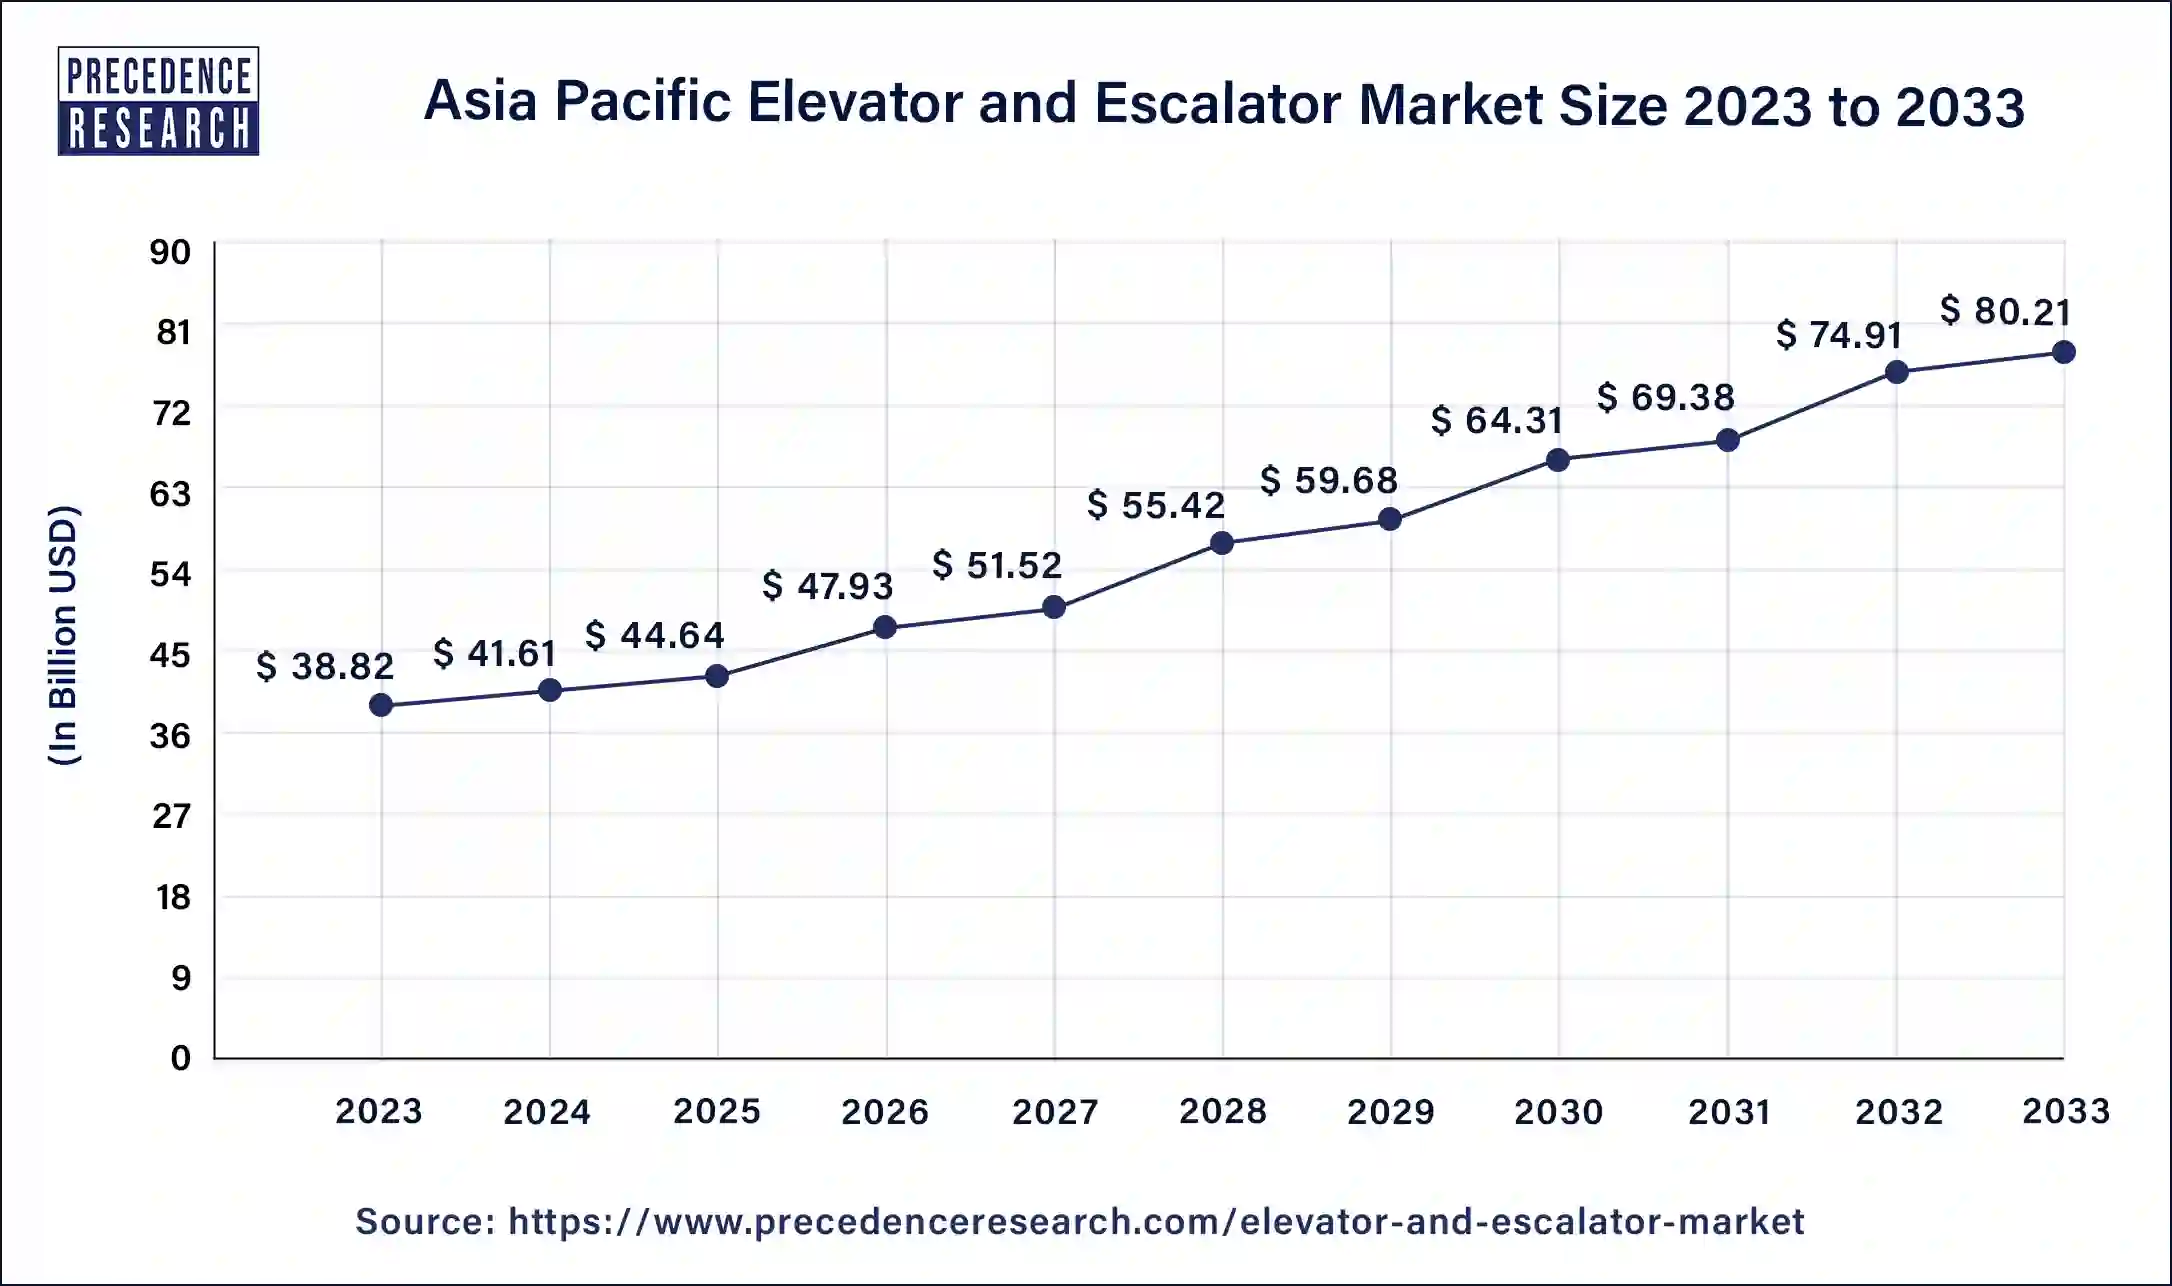 Asia Pacific Elevator and Escalator Market Size 2024 to 2033